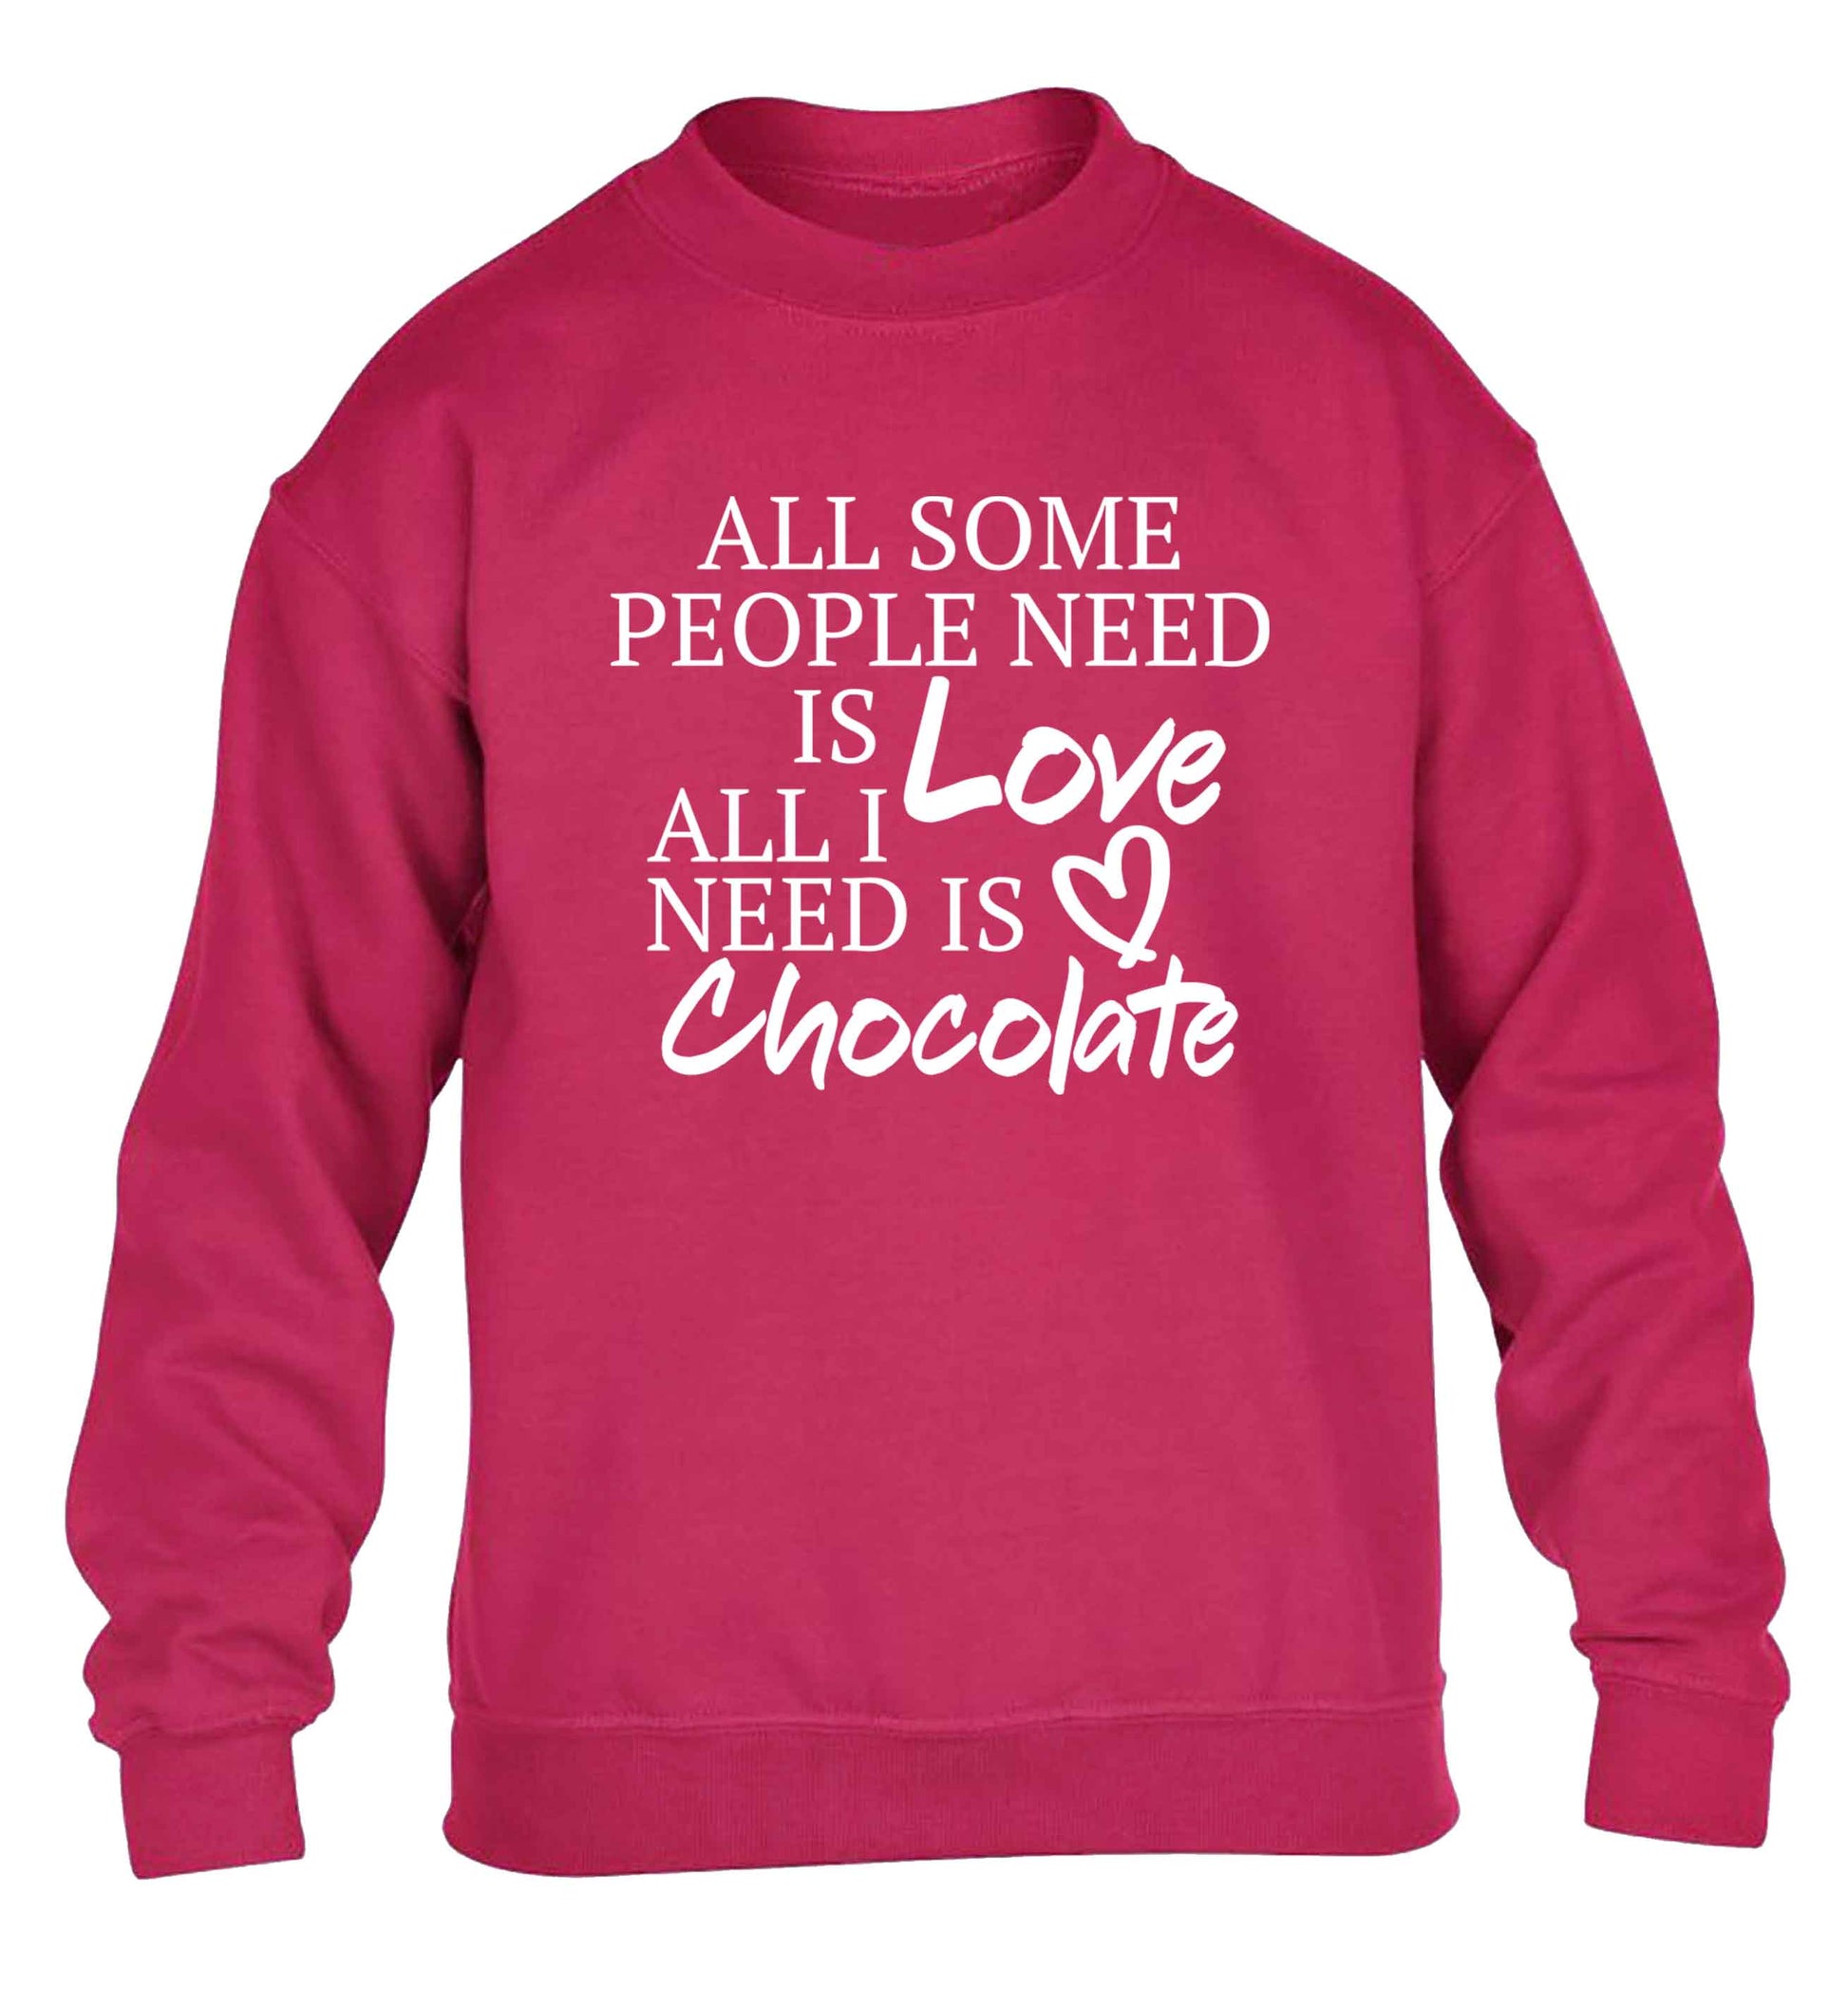 All some people need is love all I need is chocolate children's pink sweater 12-13 Years